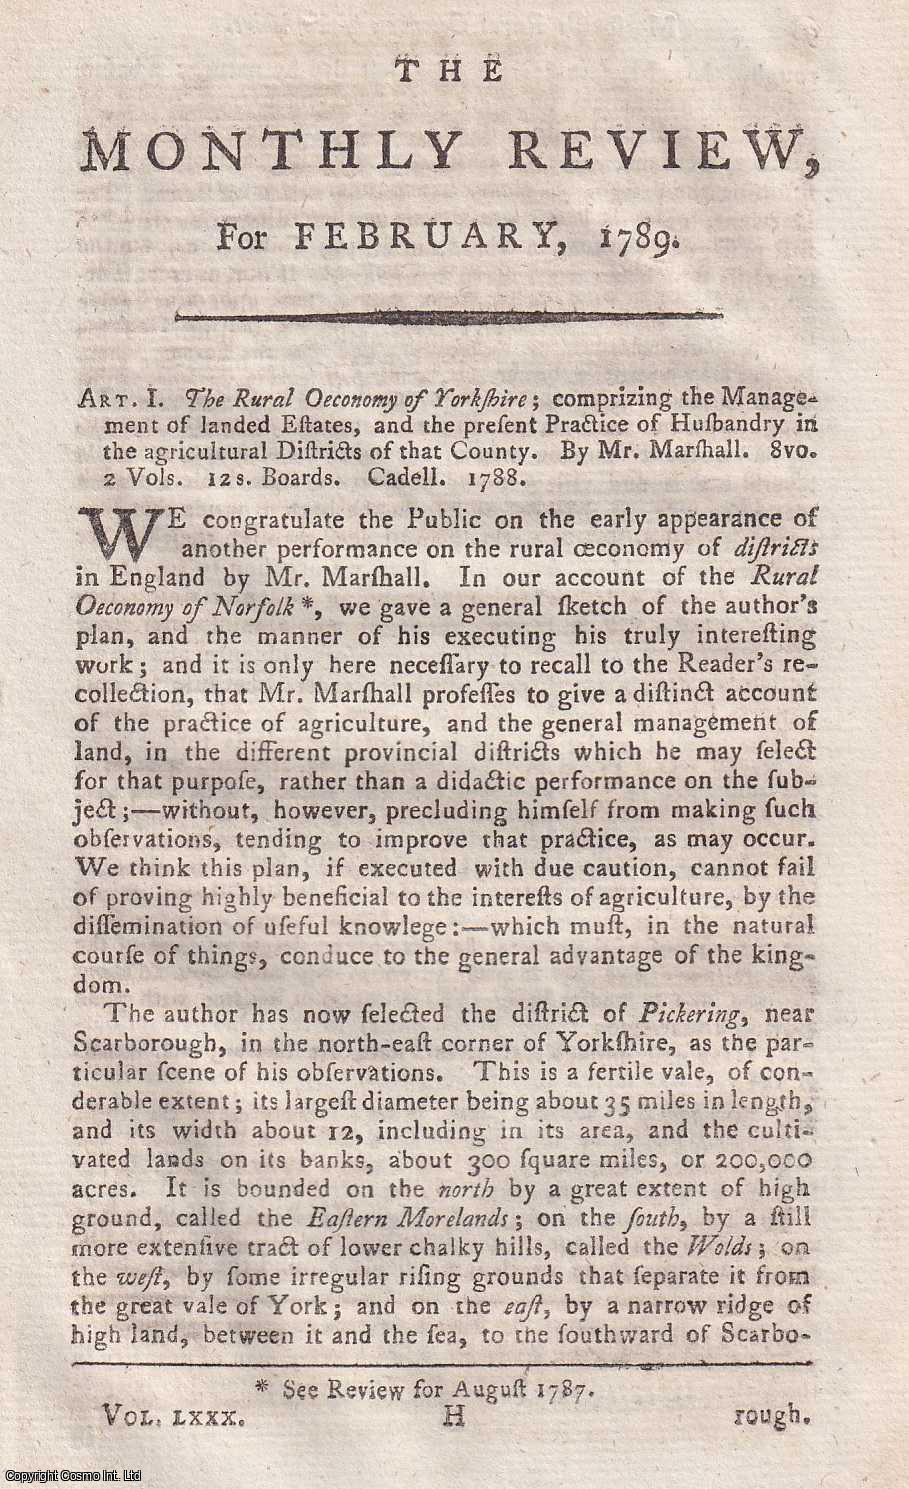 Author Not Stated - The Rural Oeconomy of Yorkshire, by William Marshall. An original essay from the Monthly Review, 1789. No author is given for this article.